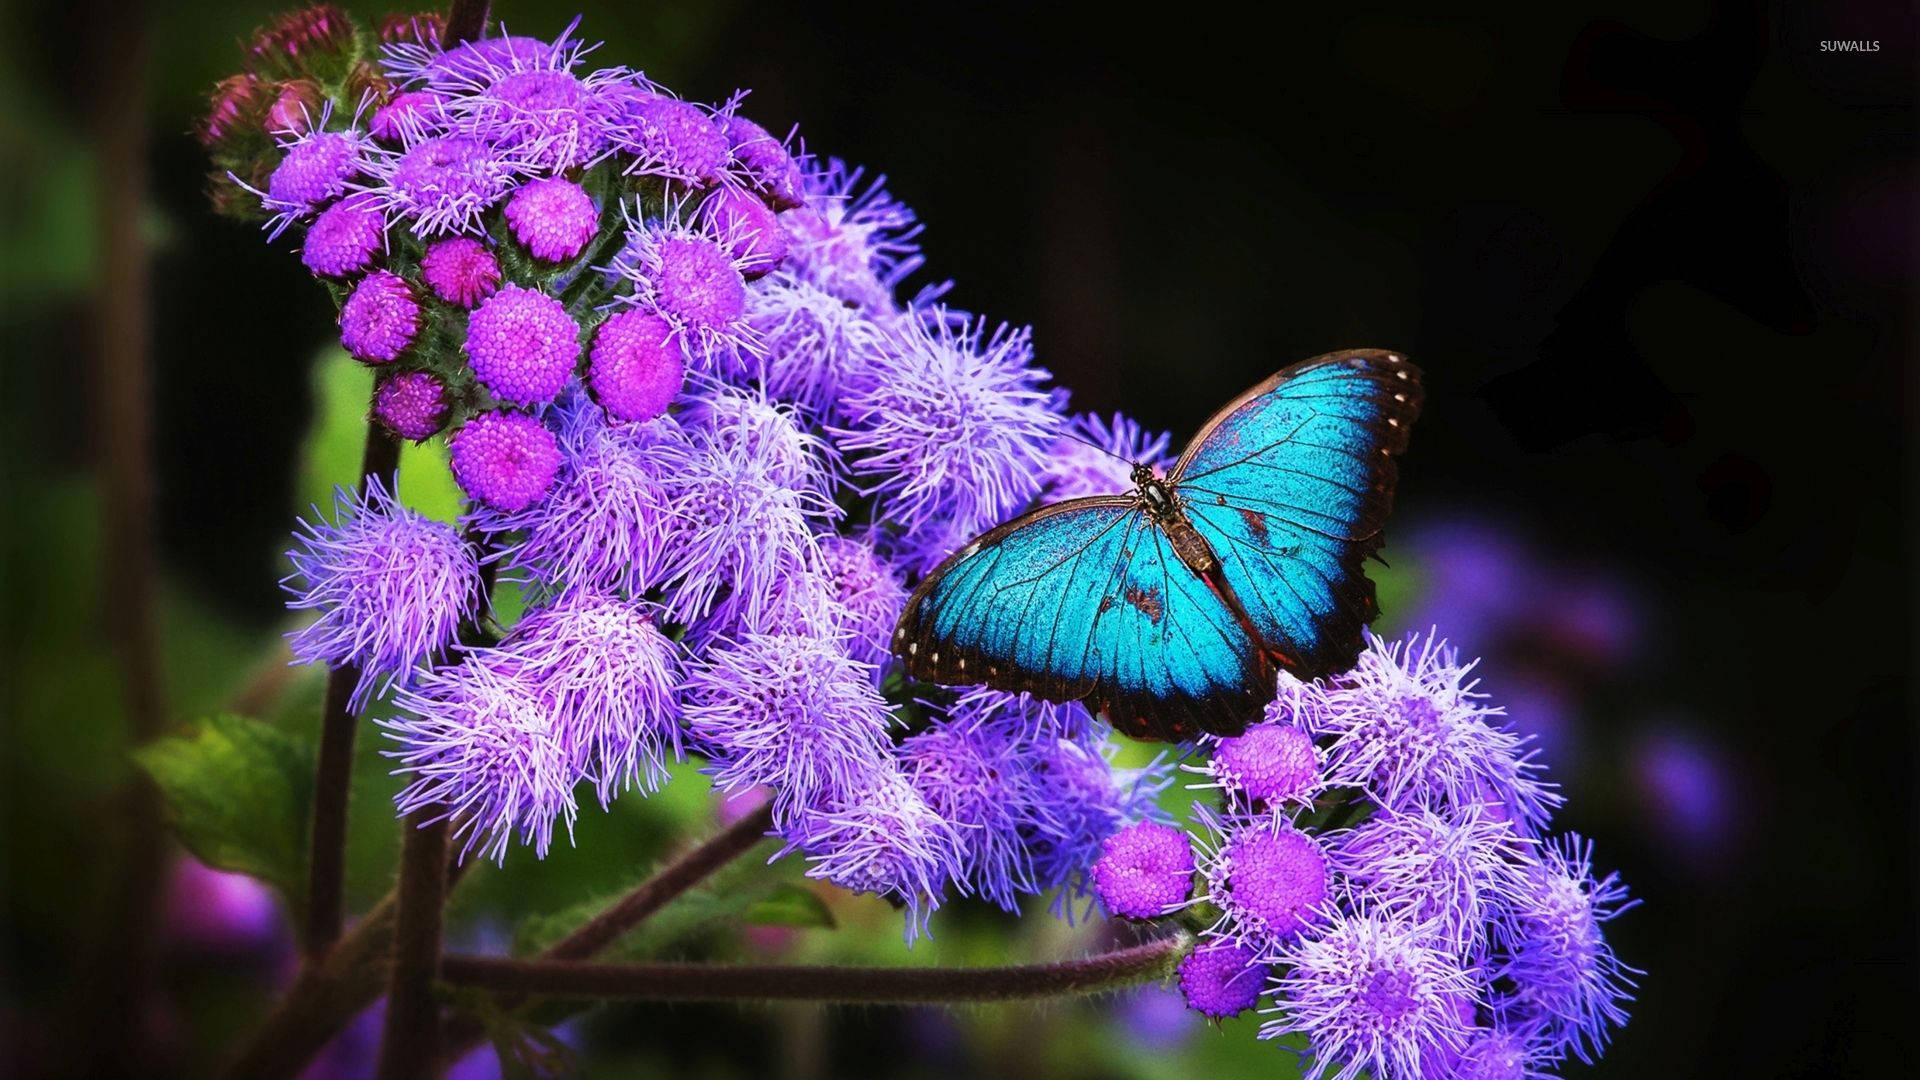 Blue Butterfly Aesthetic On Lavender Background